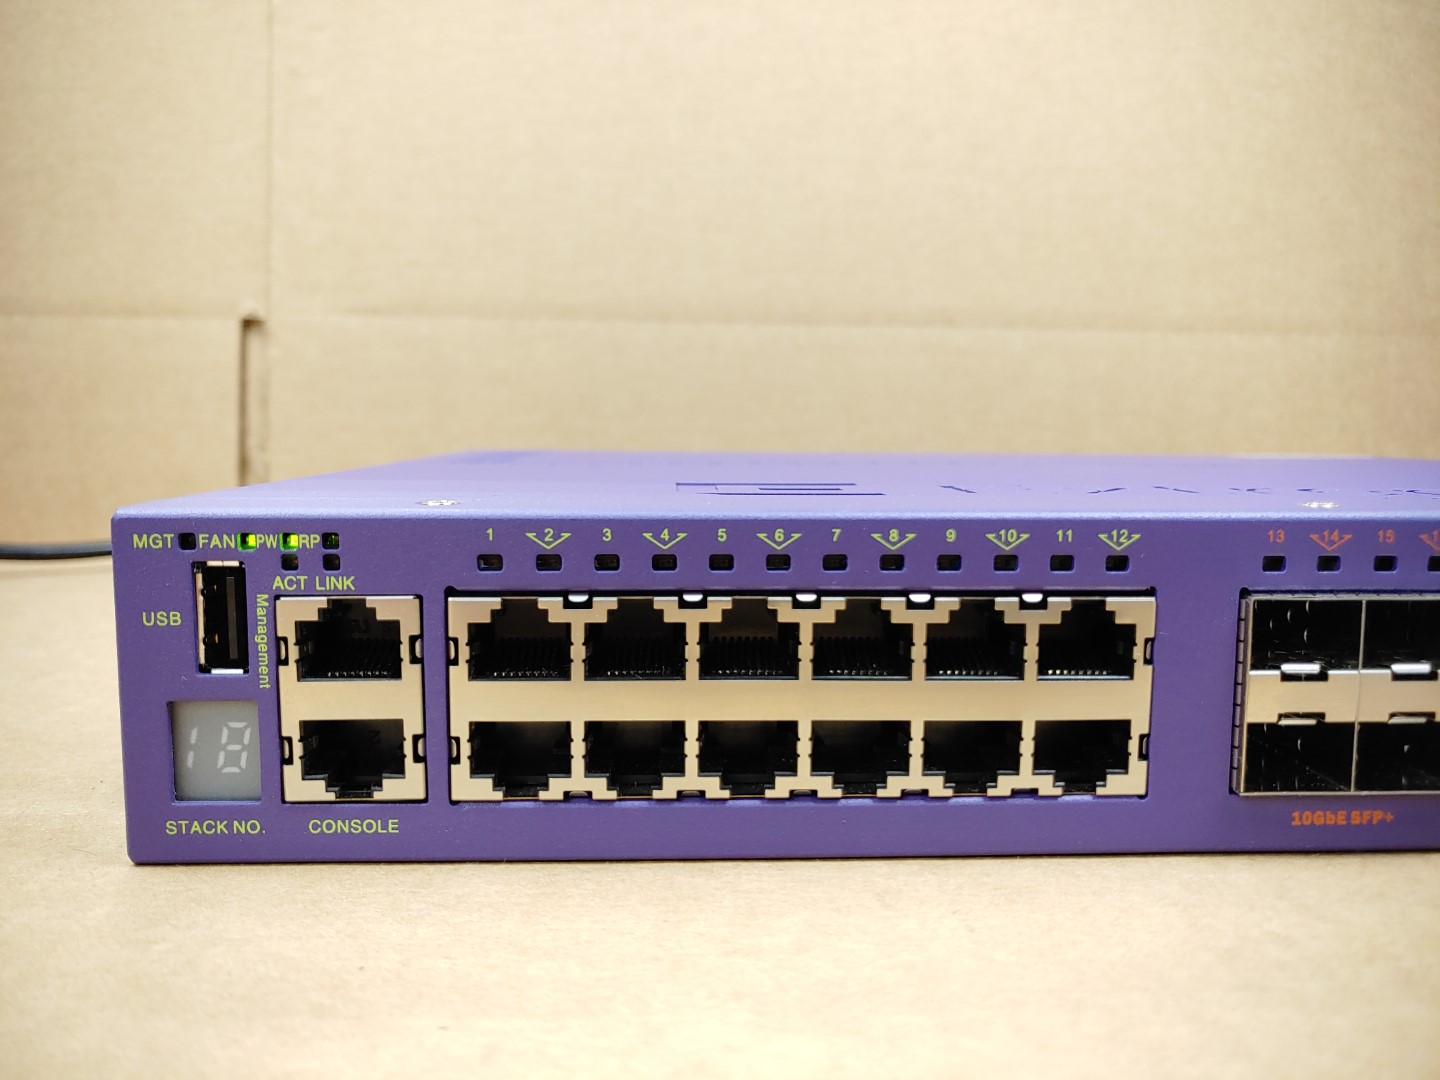 Good Condition! Tested and pulled from a working environment. **NO POWER CORD INCLUDED**Item Specifics: MPN : X440-G2-12p-10GE4UPC : N/AType : Ethernet SwitchForm Factor : Rack-MountableBrand : Extreme NetworksModel : X440-G2-12p-10GE4Network Management Type : Fully ManagedLayer : 3Number of LAN Ports : 12Network Connectivity : Wired-Ethernet (RJ-45)Max. Data Transfer Rate : 1 GbpsEthernet Technology : Gigabit Ethernet (1000-Mbit/s)Network Type : ATA over Ethernet - 2